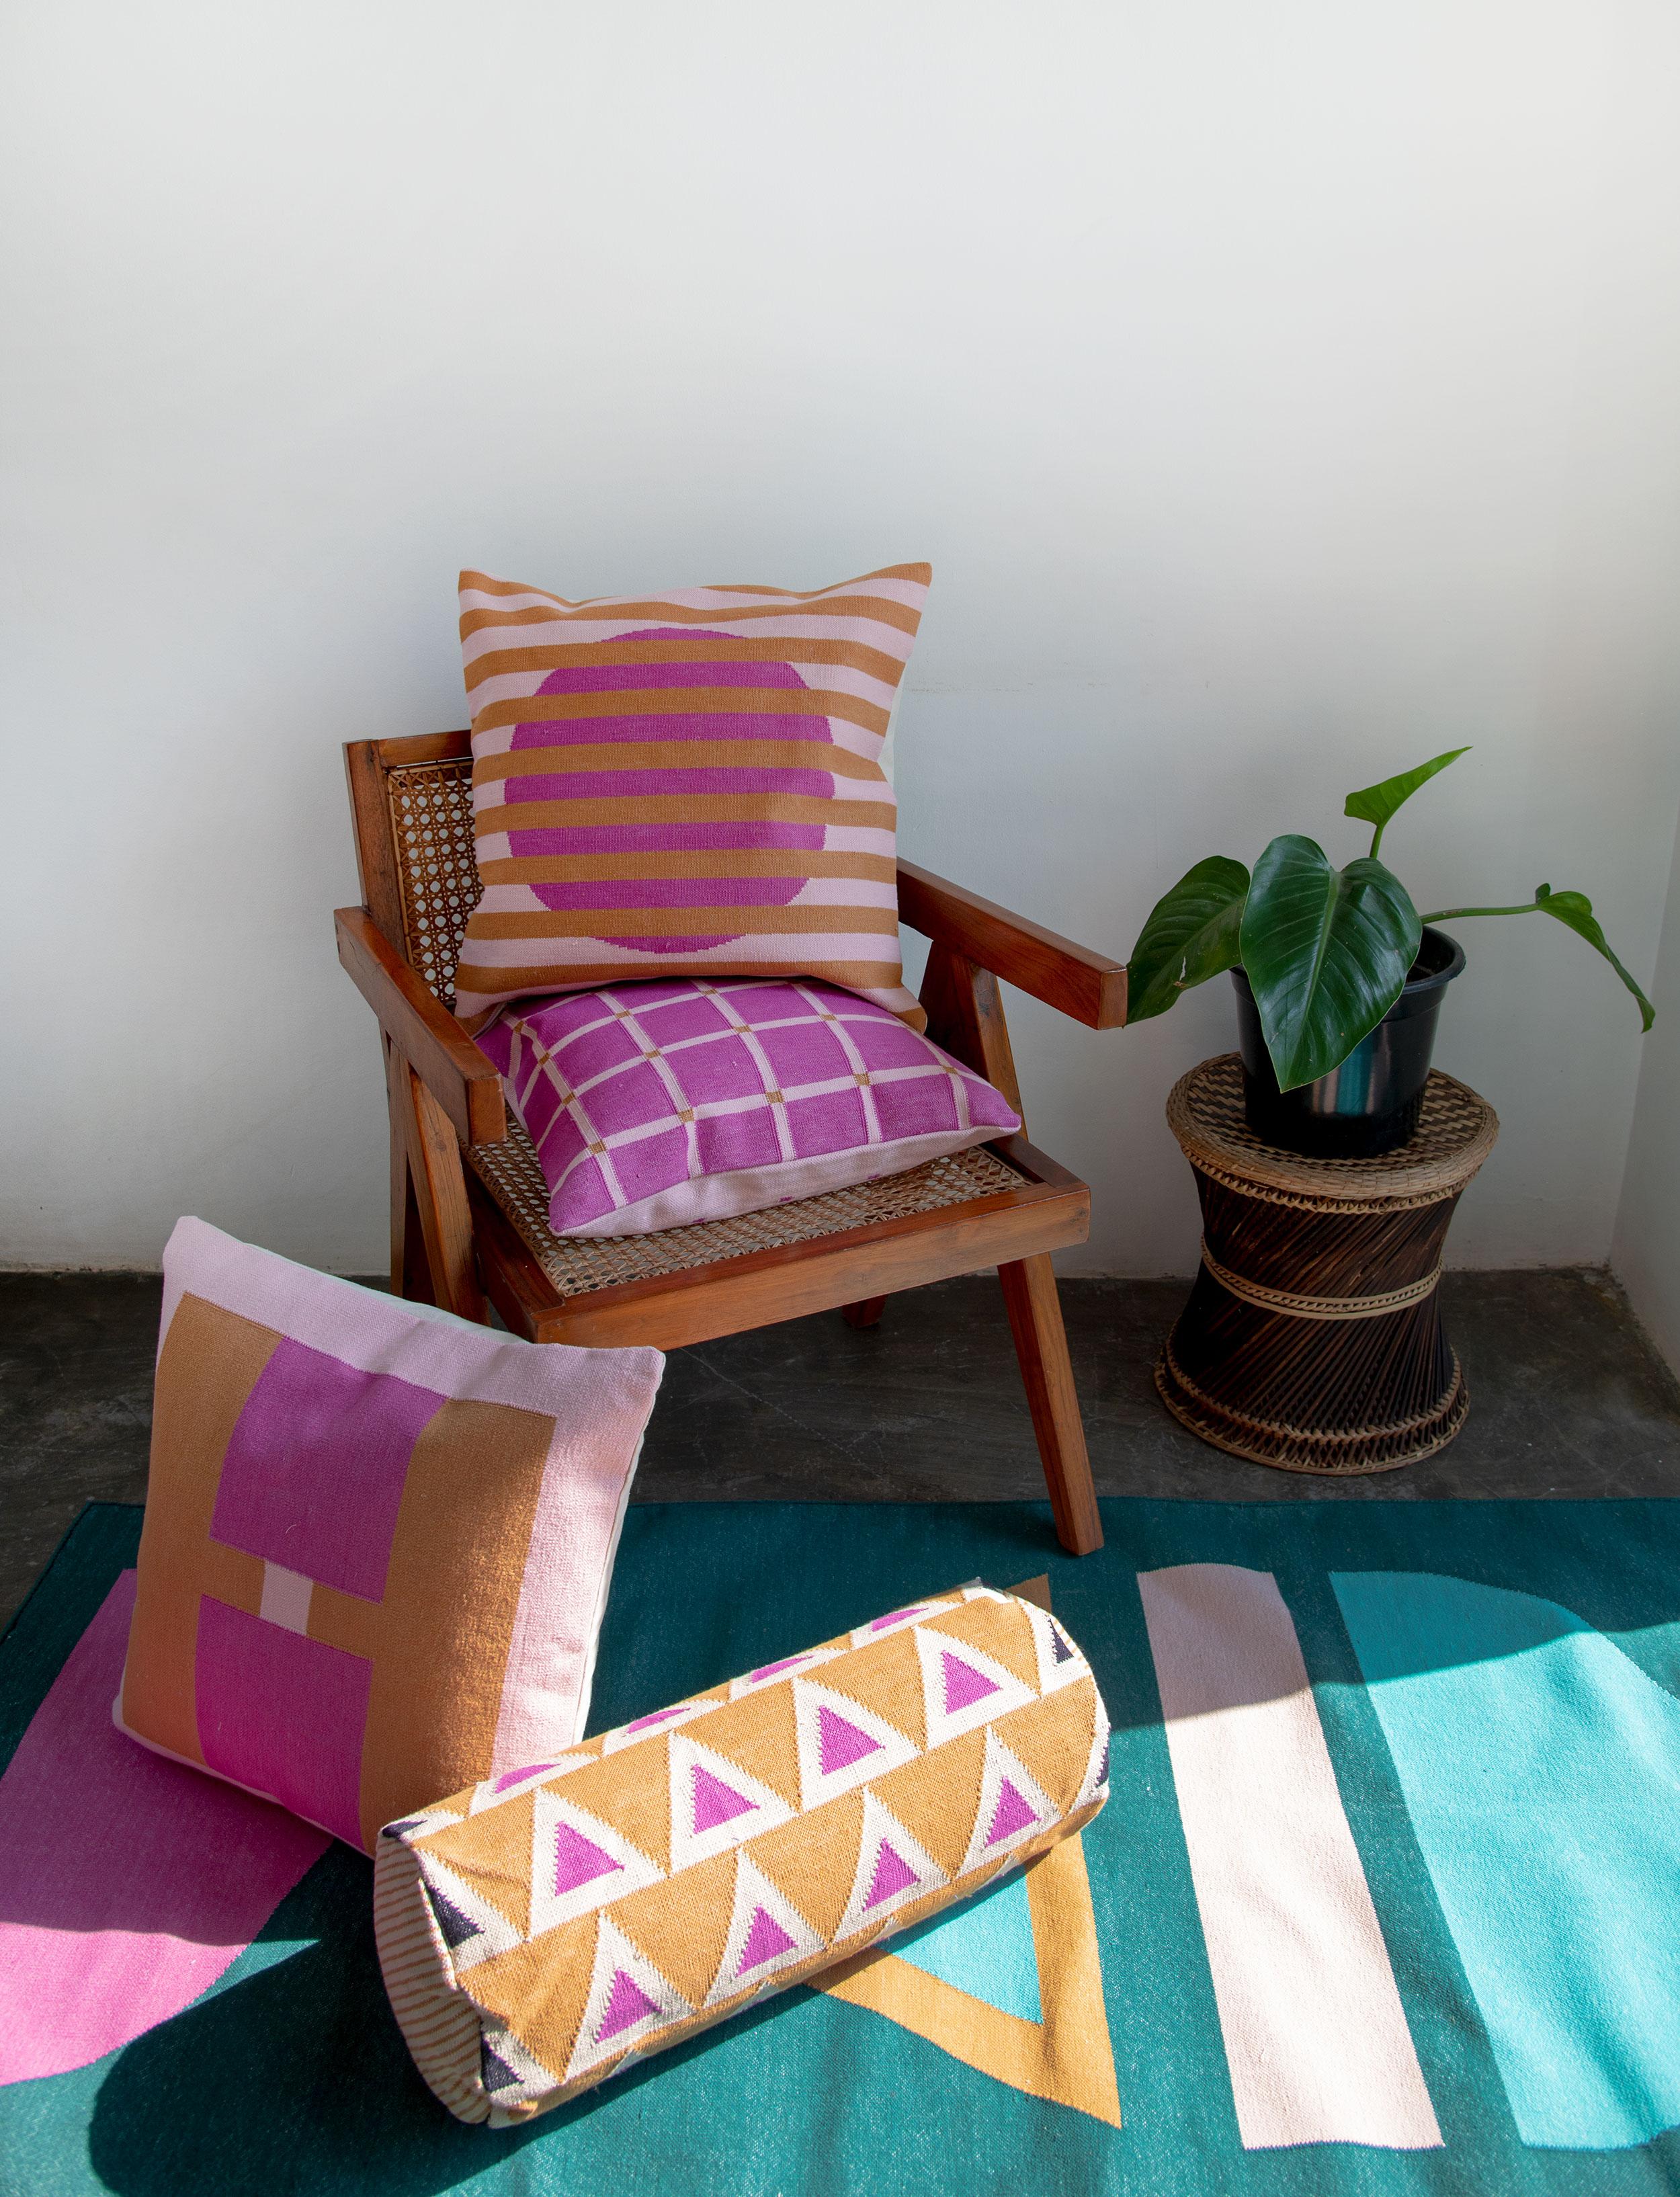 This geometric throw pillow has been ethically hand woven by artisans in Rajasthan, India, using a traditional weaving technique which is native to this region.

The purchase of this handcrafted pillow helps to support the artisans and preserve